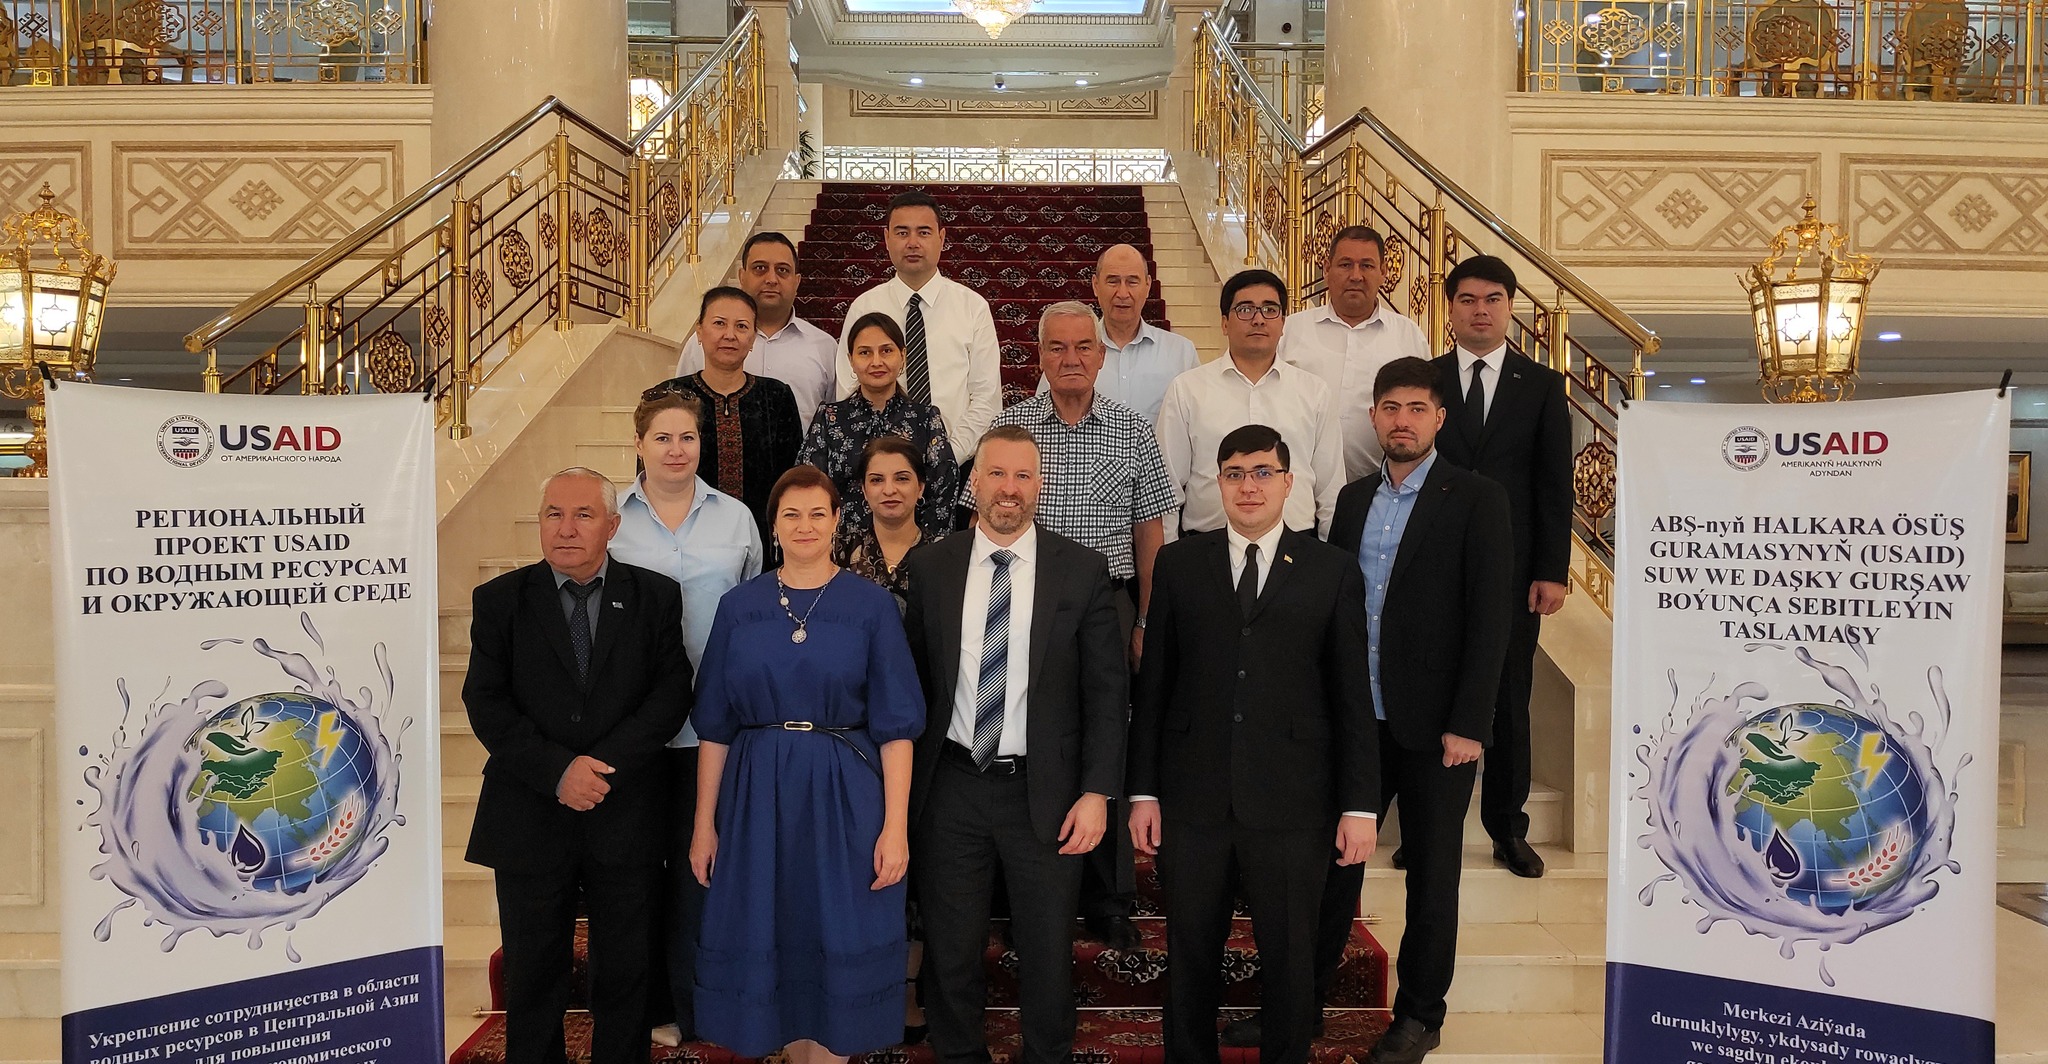 The 5th meeting of the National Intersectoral Committee was held in Turkmenistan